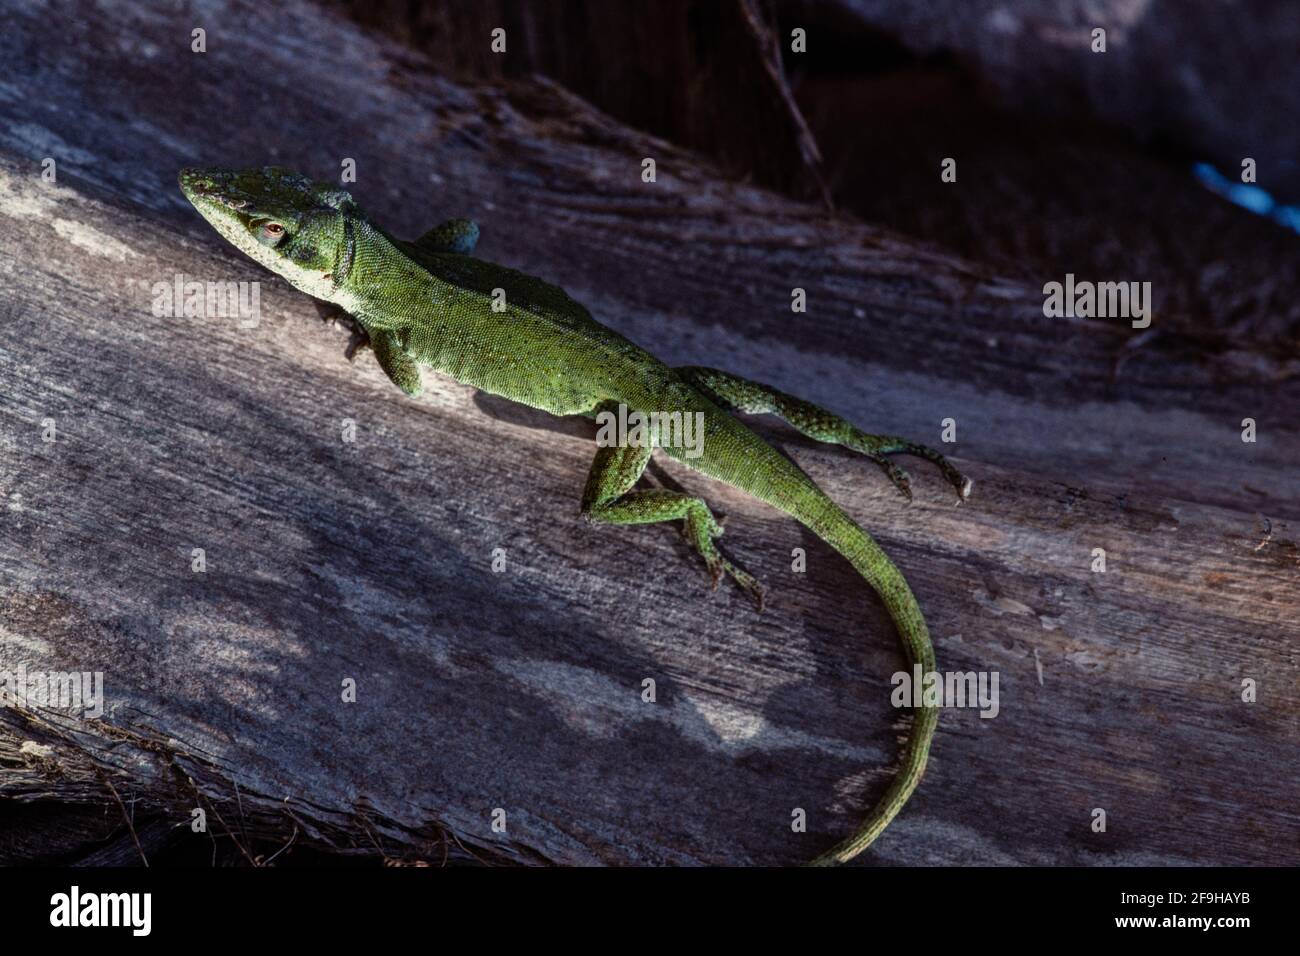 A Green Anole, Anolis carolinensis, on the trunk of a palm tree on the island of Guam. Stock Photo